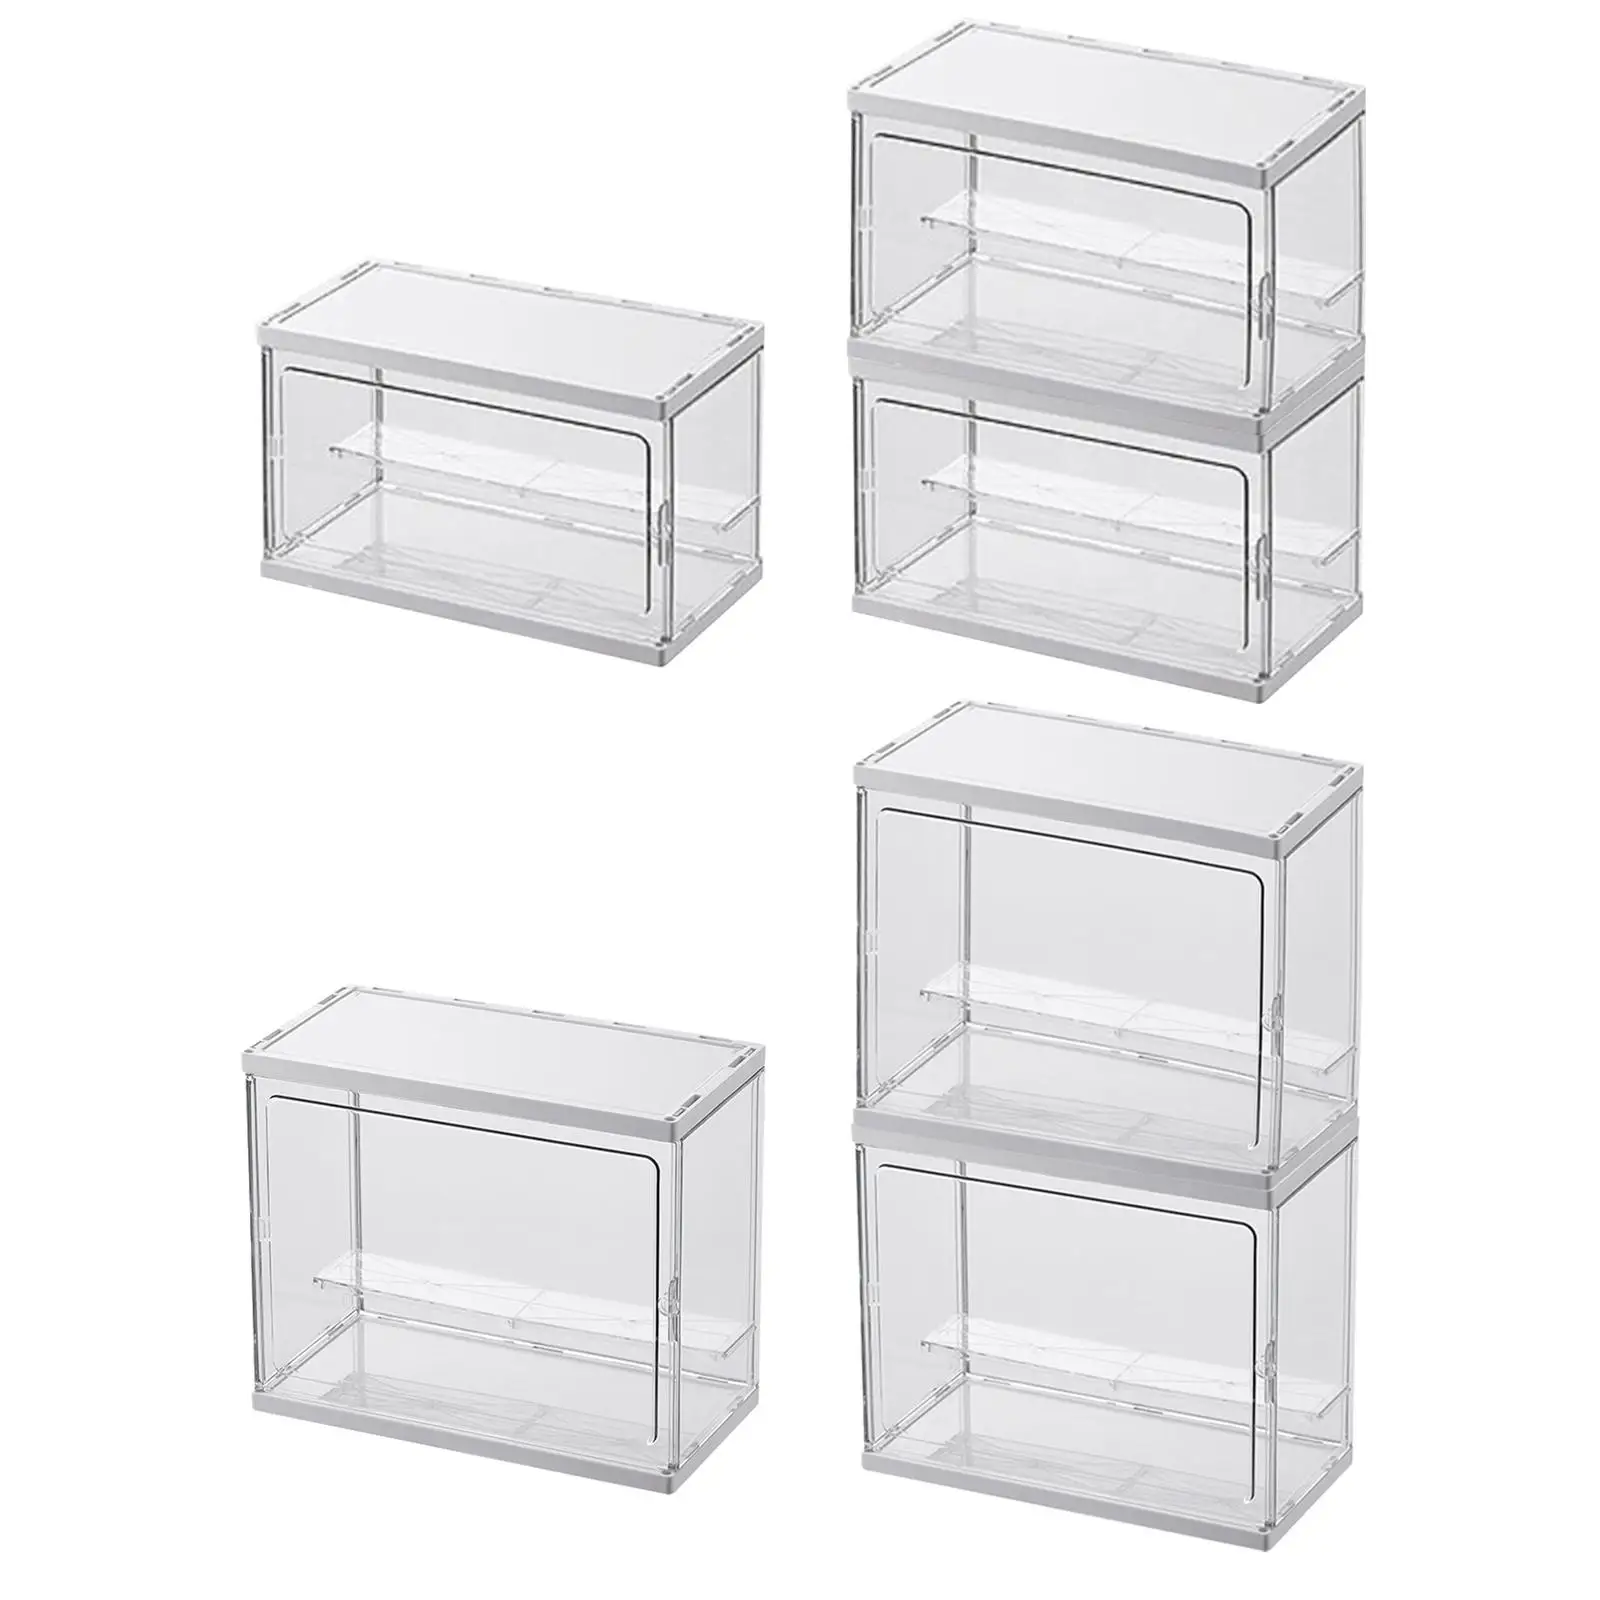 Clear Model Toy Display Case Action Figures Display Box Model Toy Dustproof for Model Figures Vehicle Toys Dolls Toy